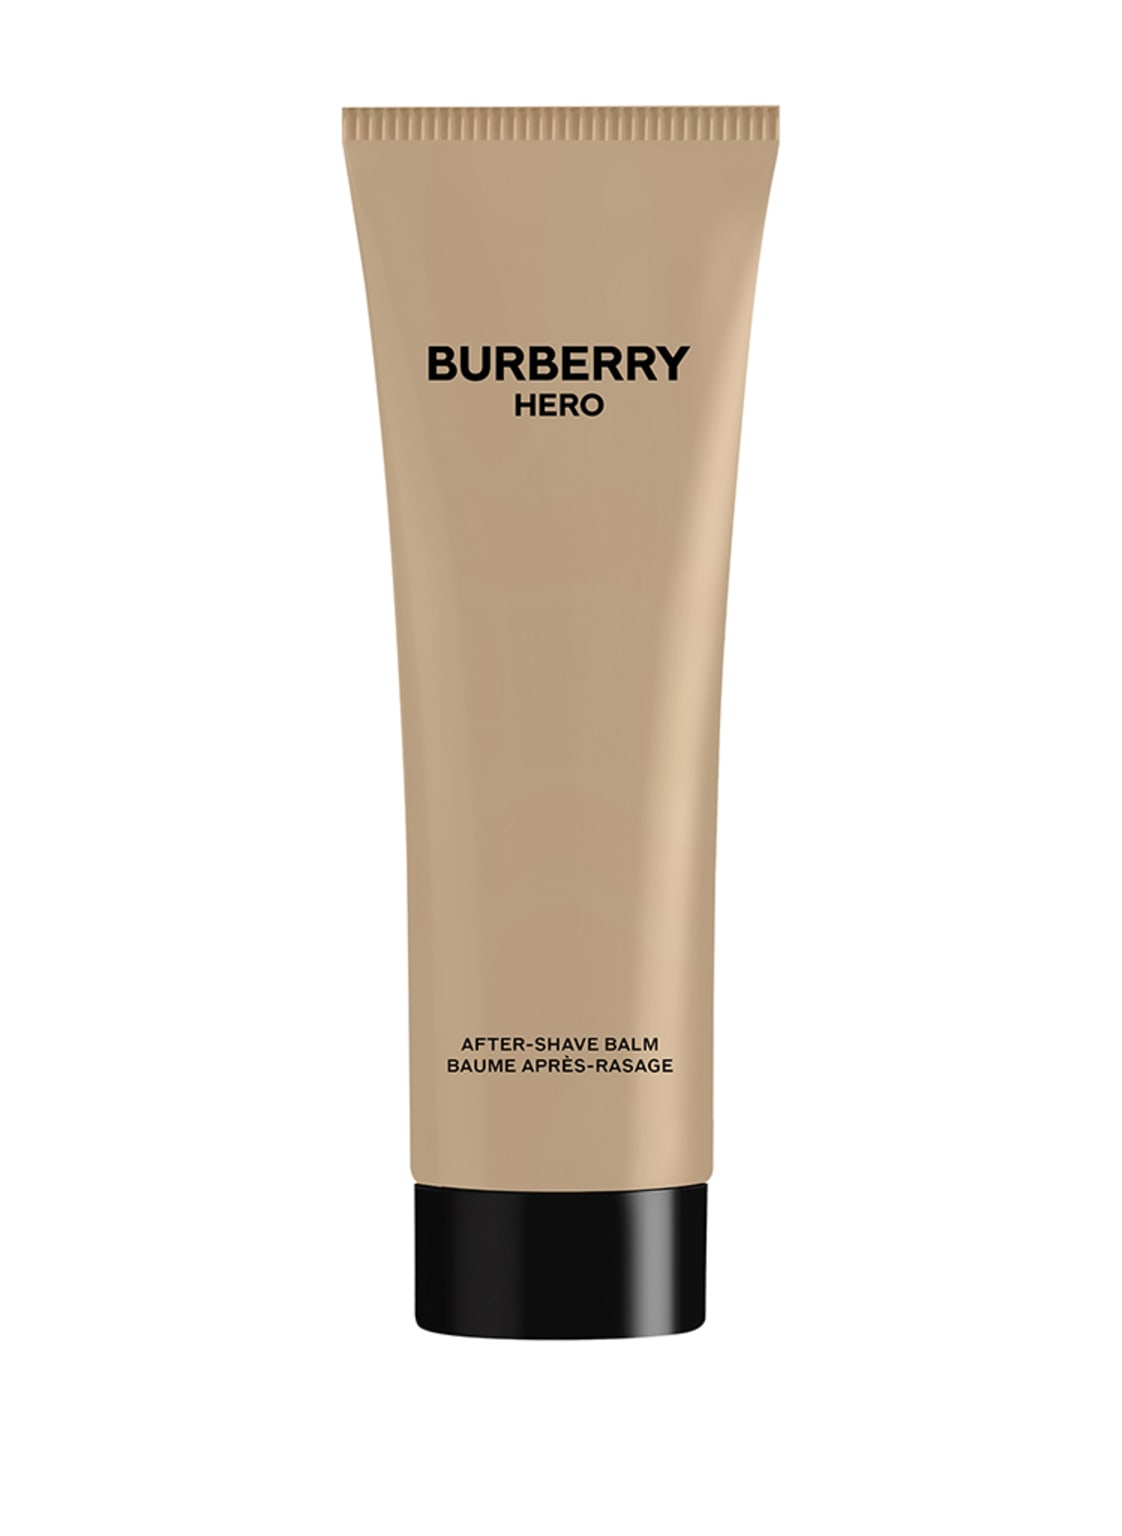 Image of Burberry Beauty Hero After-Shave Balm 75 ml